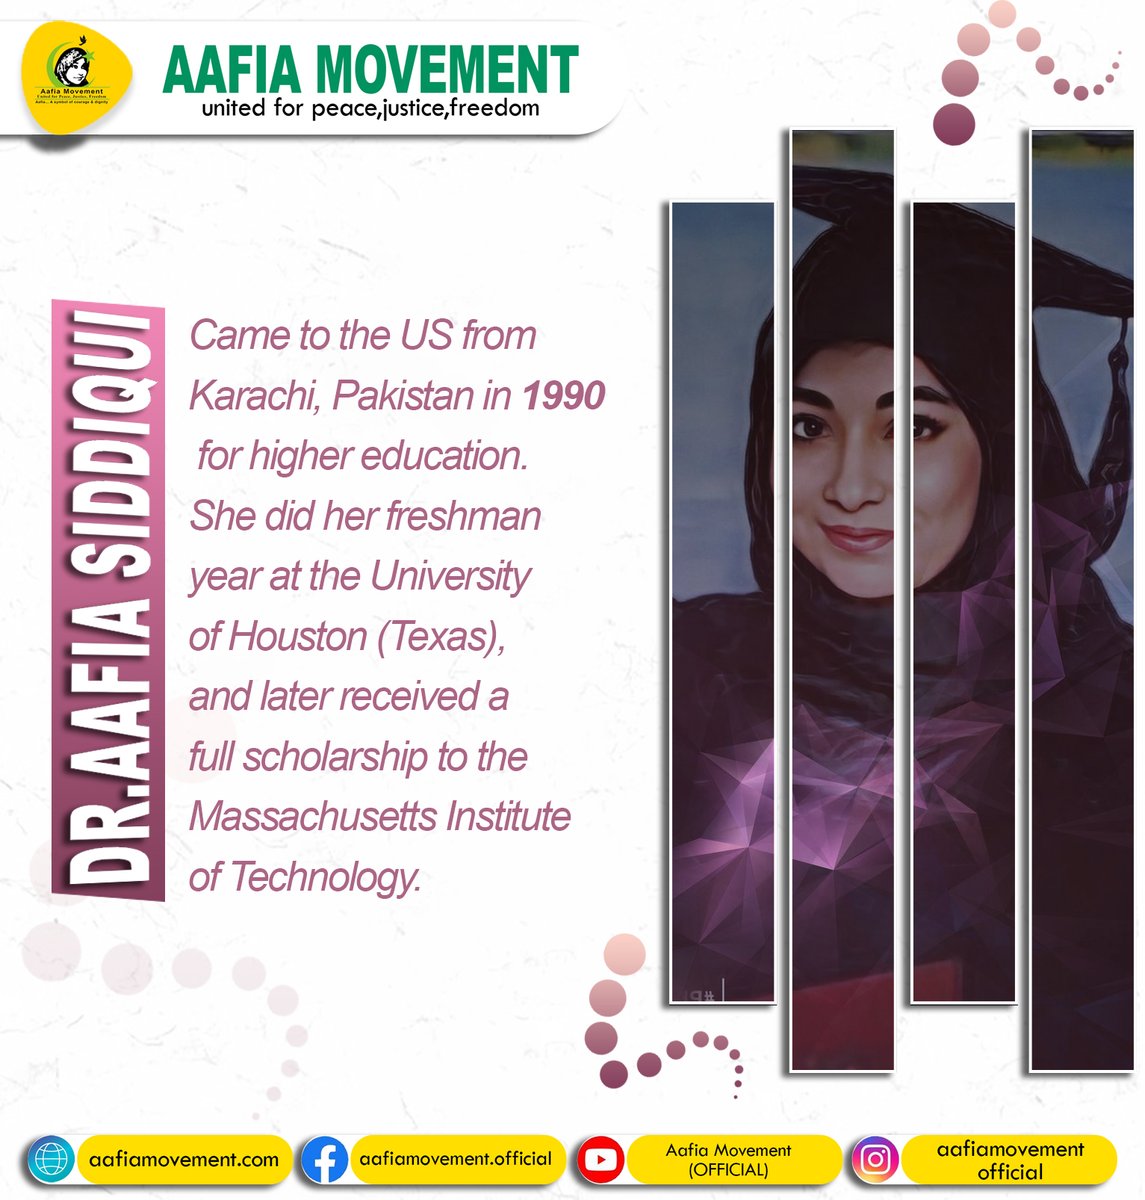 The time for action is now. Let's come together and demand justice for Dr. Aafia Siddiqui. #IAmAafia #FreeAafia